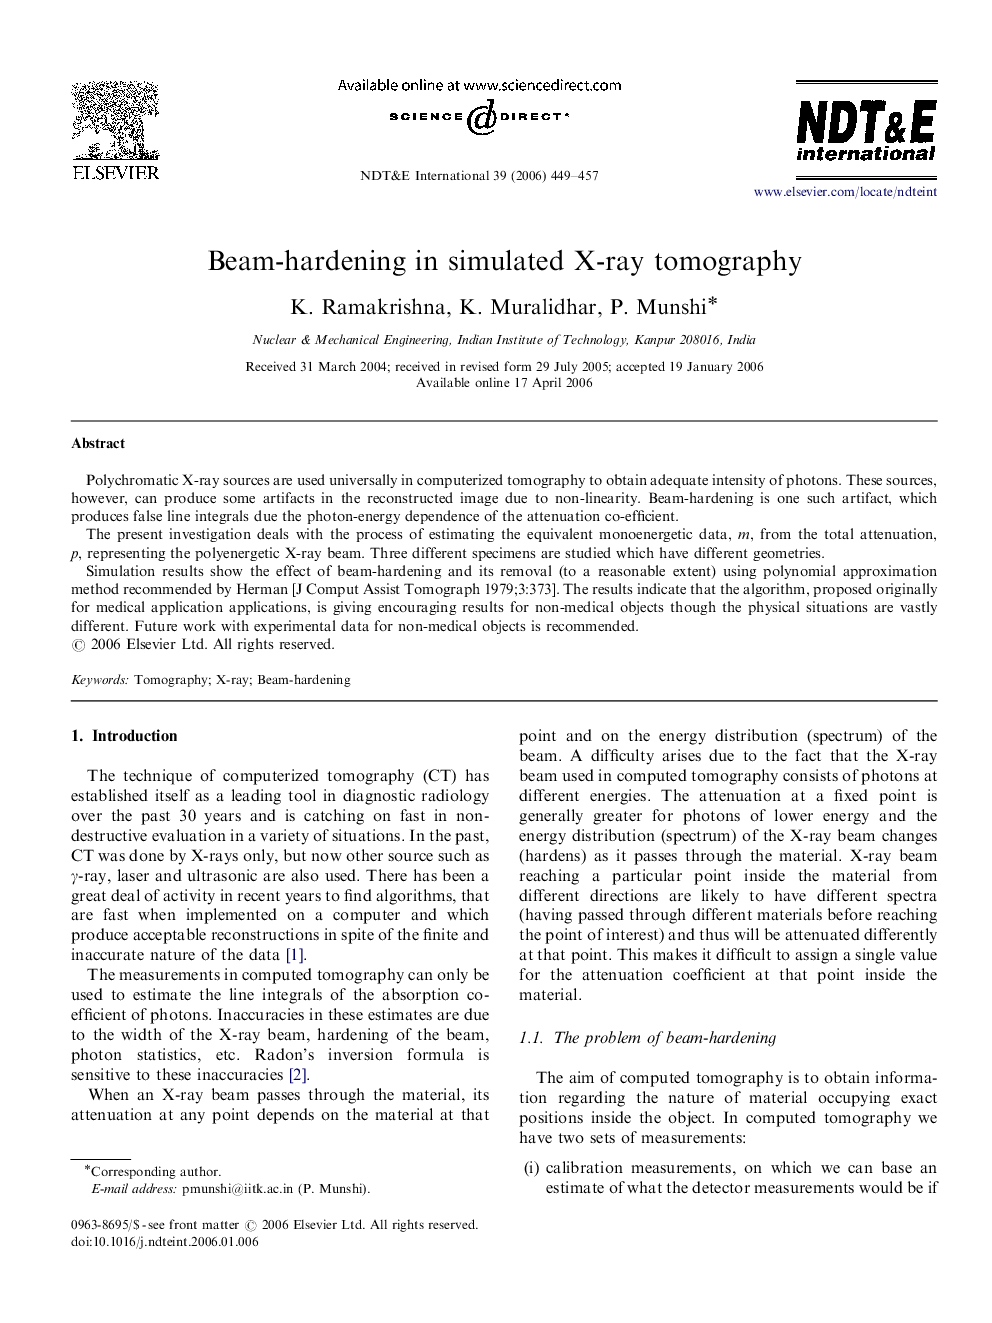 Beam-hardening in simulated X-ray tomography